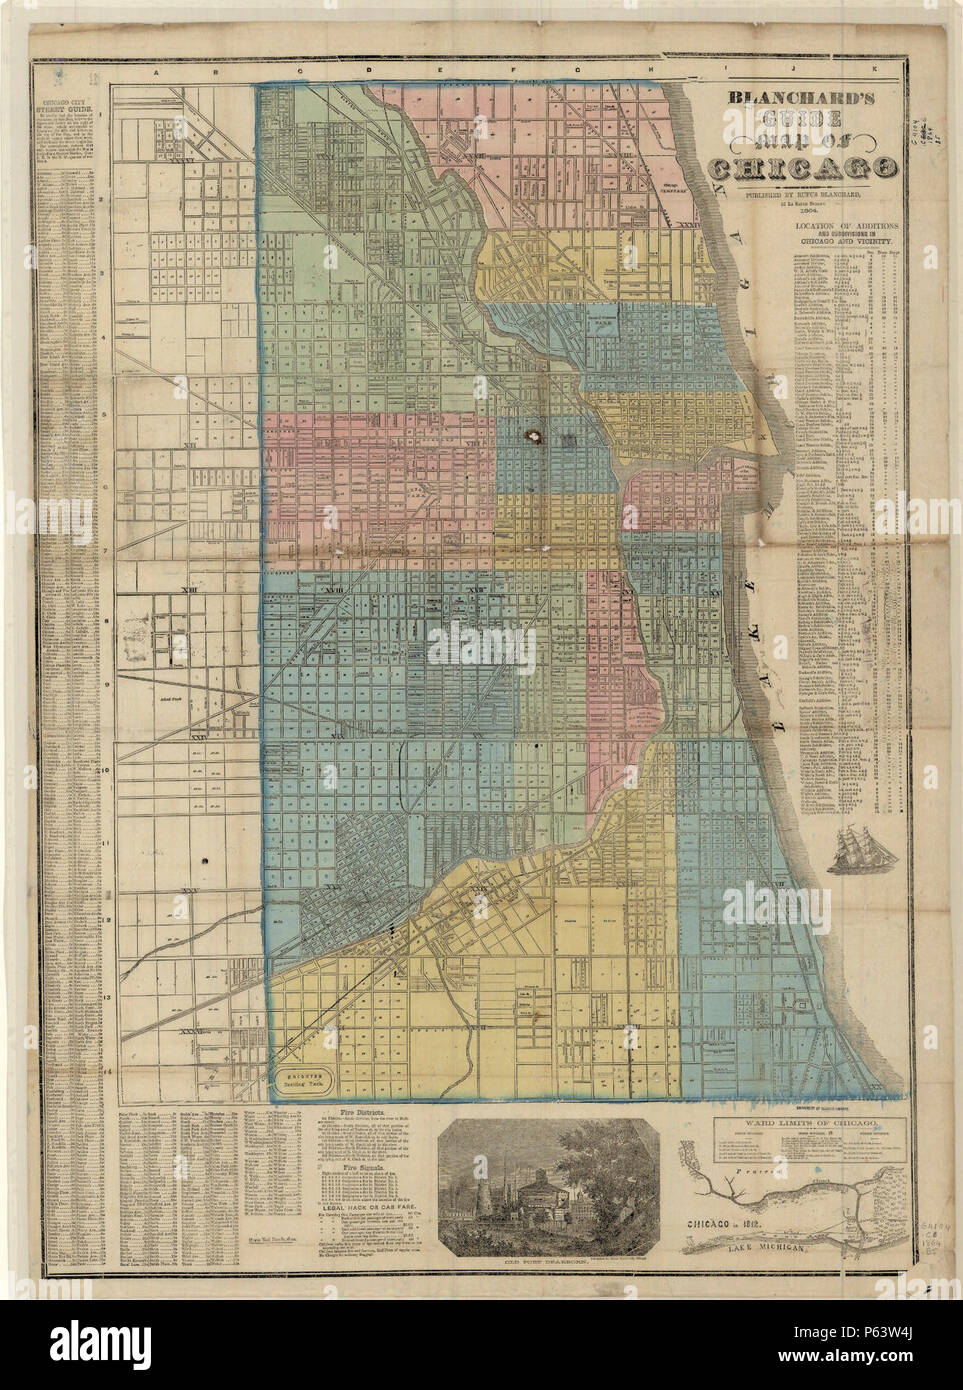 1864 Blanchard's Guide Map of Chicago. Stock Photo